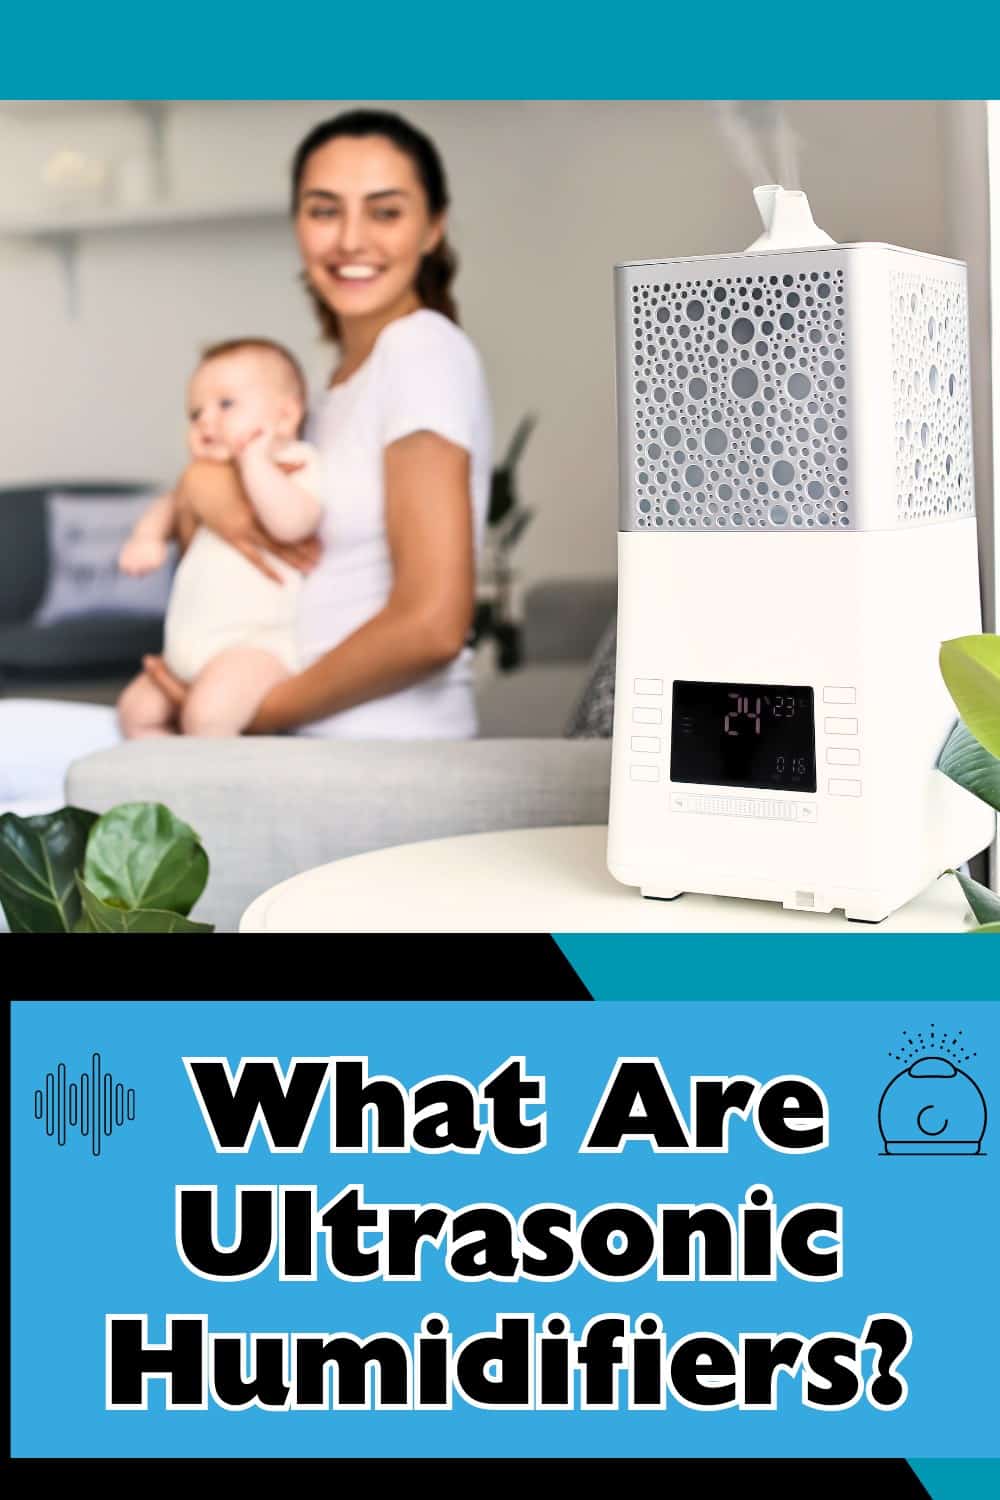 Ultrasonic Humidifiers use high-frequency sound vibrations